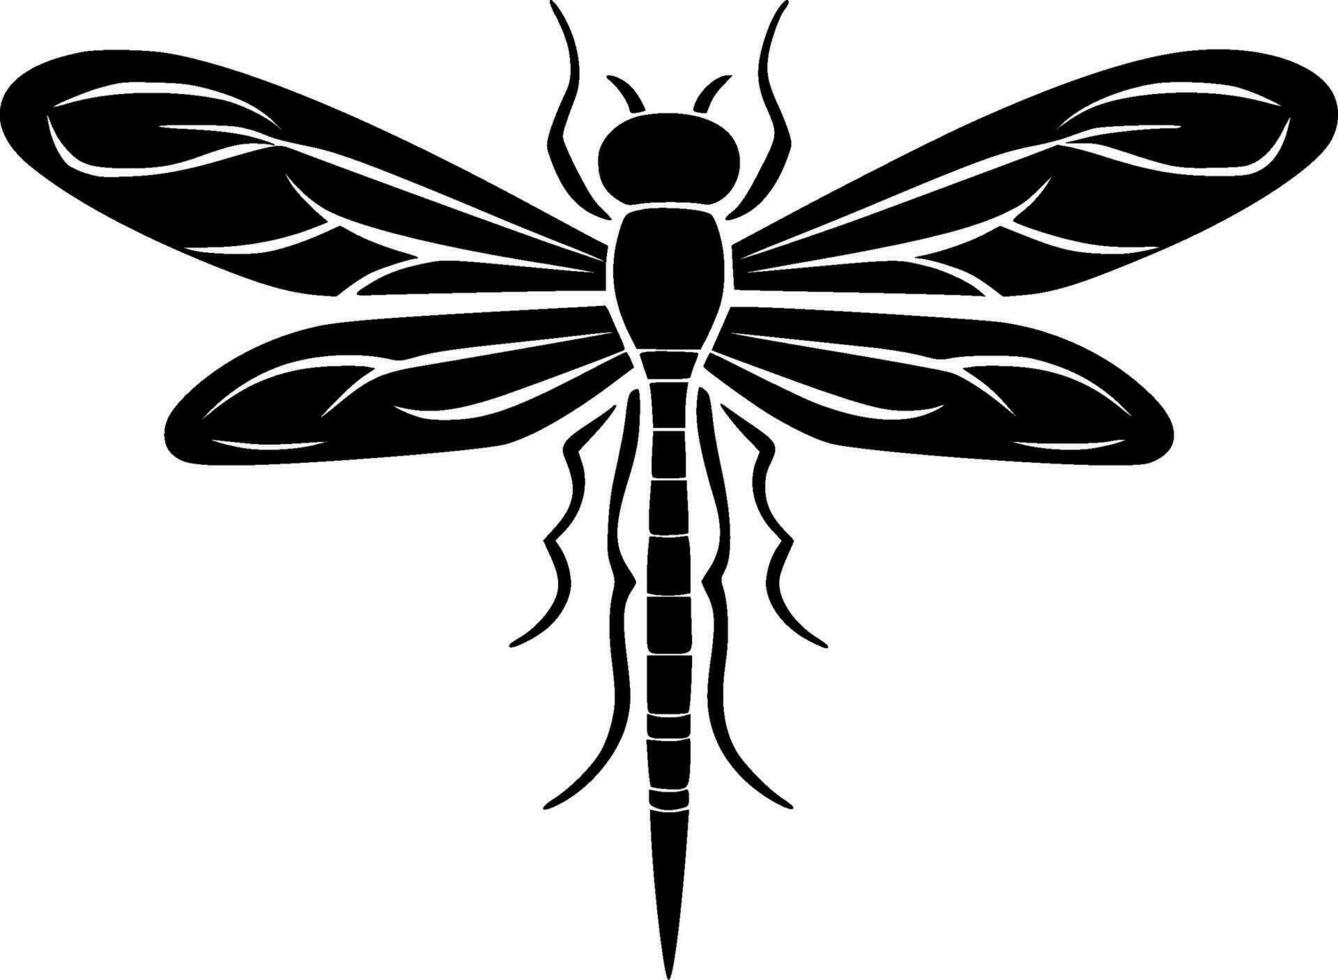 Dragonfly, Minimalist and Simple Silhouette - Vector illustration